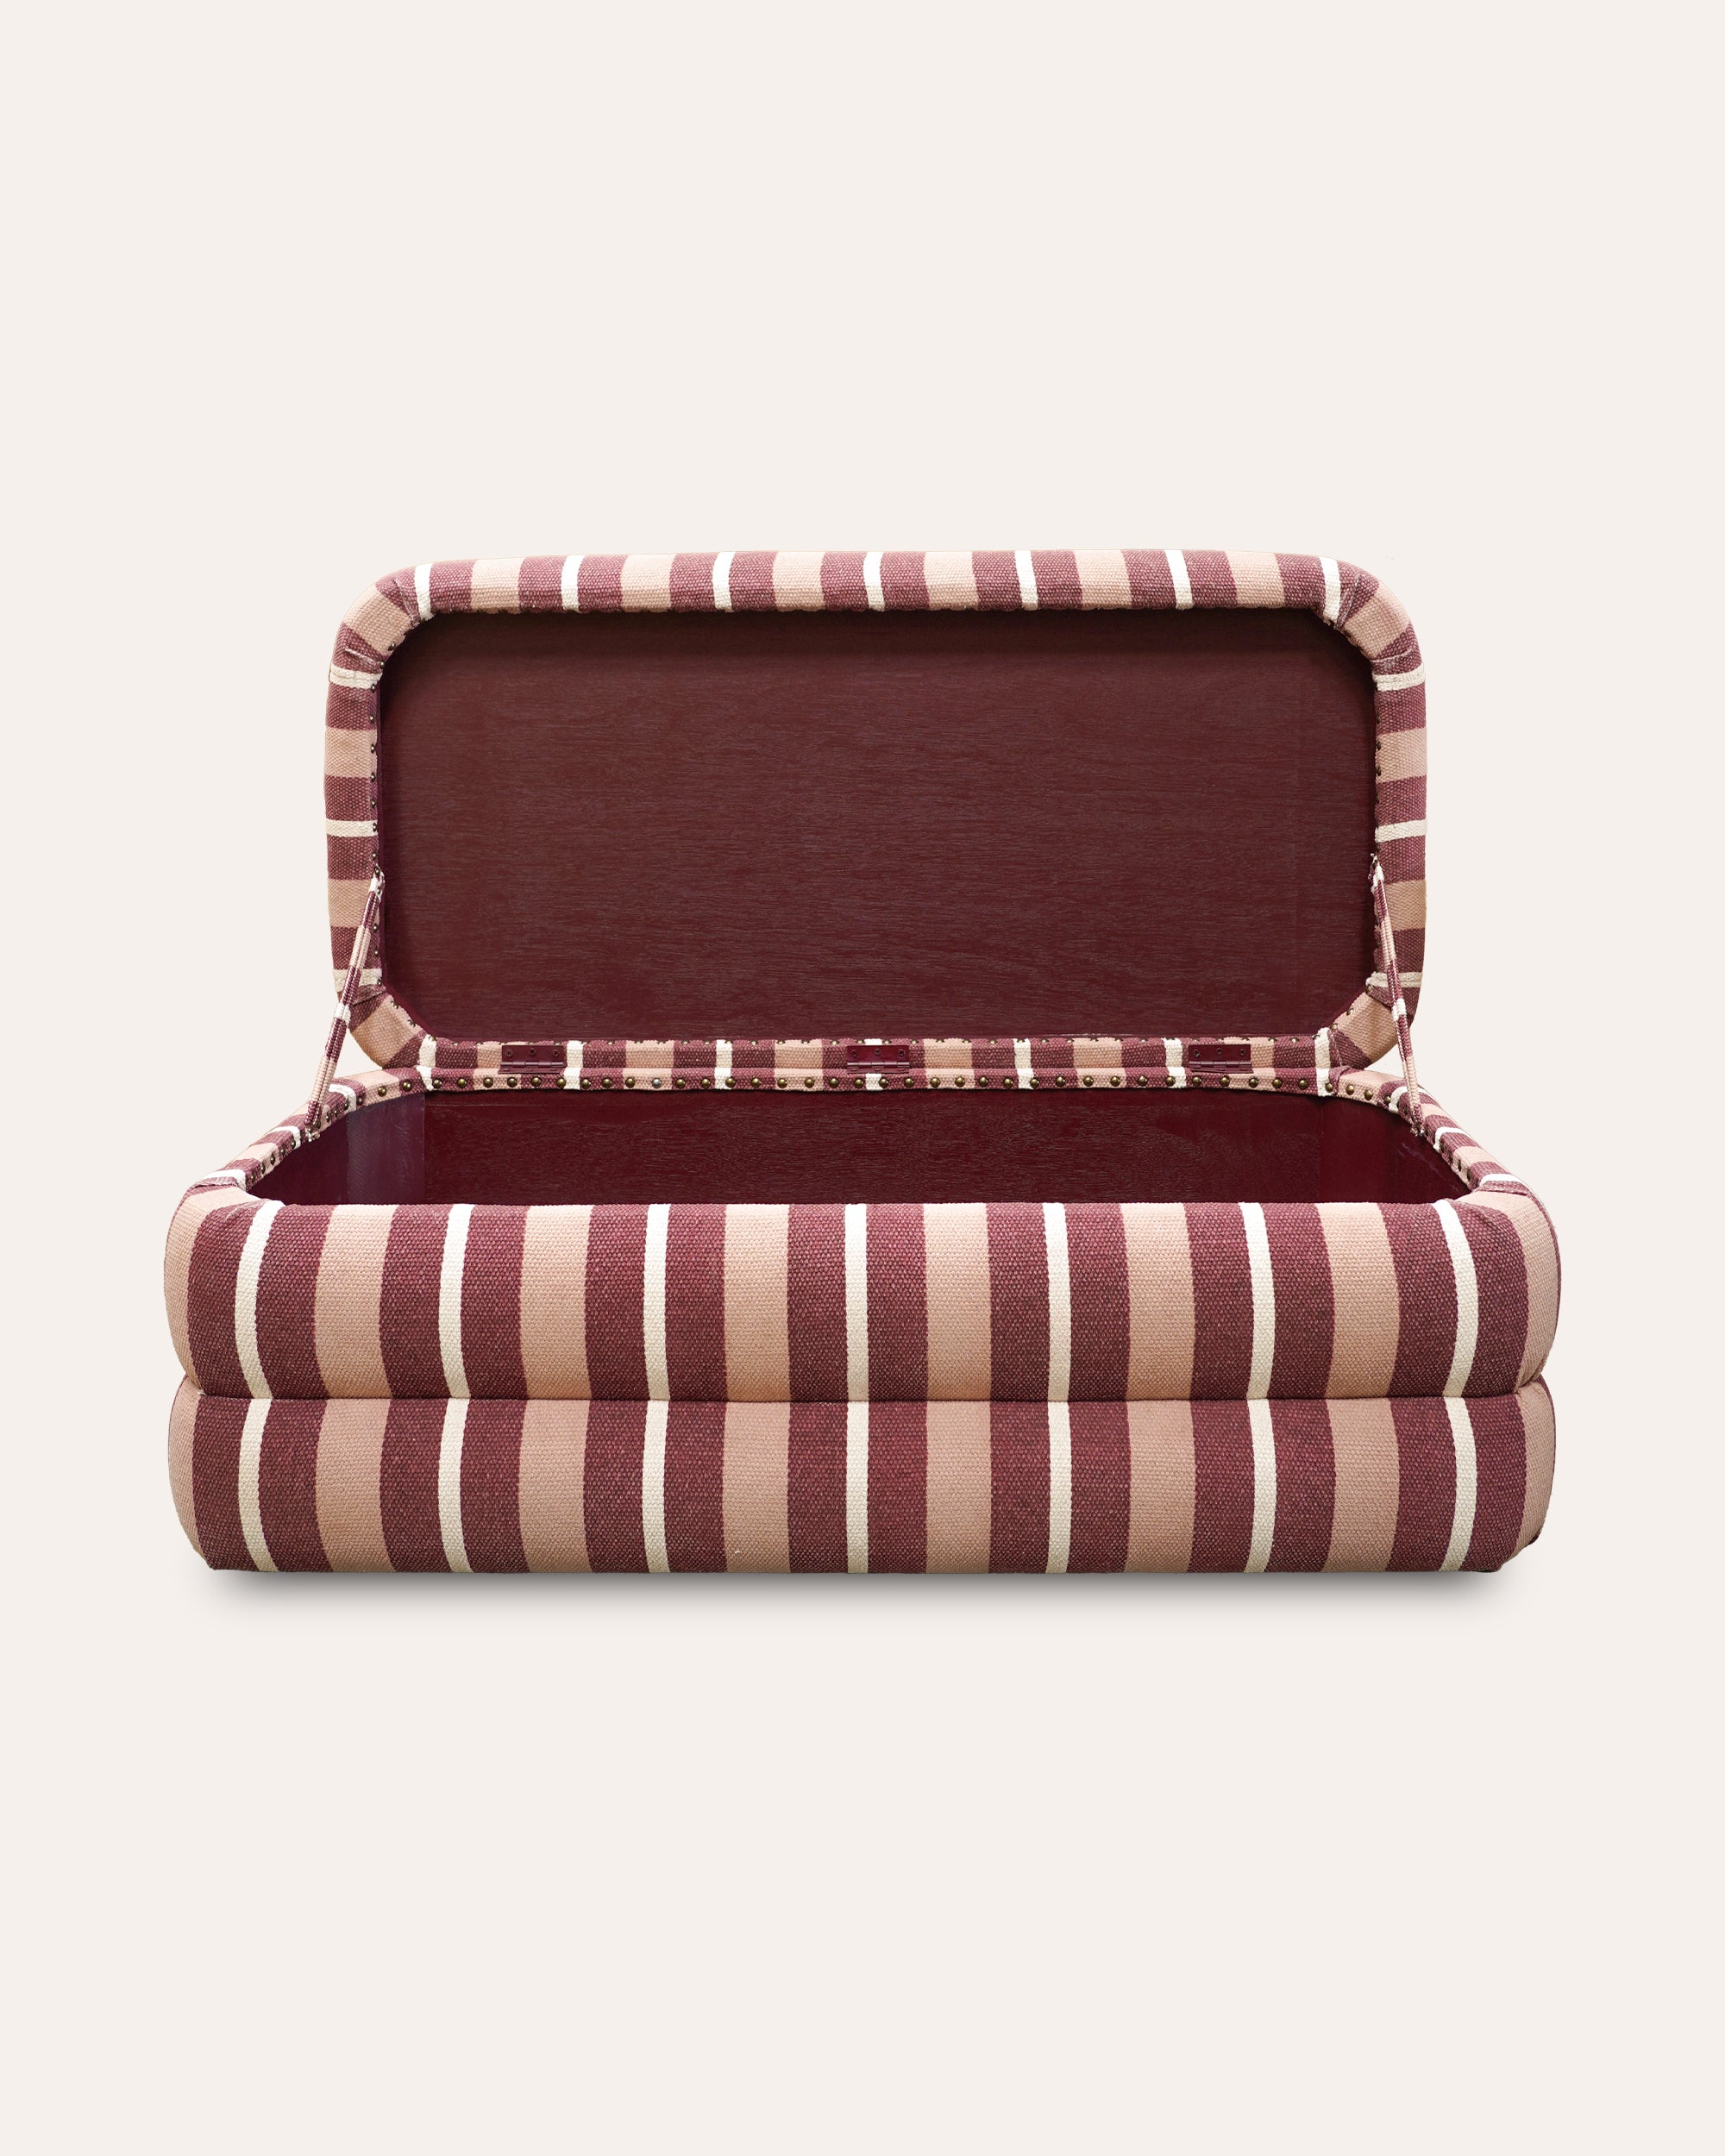 The Stripey Ottoman - The Pink and Red